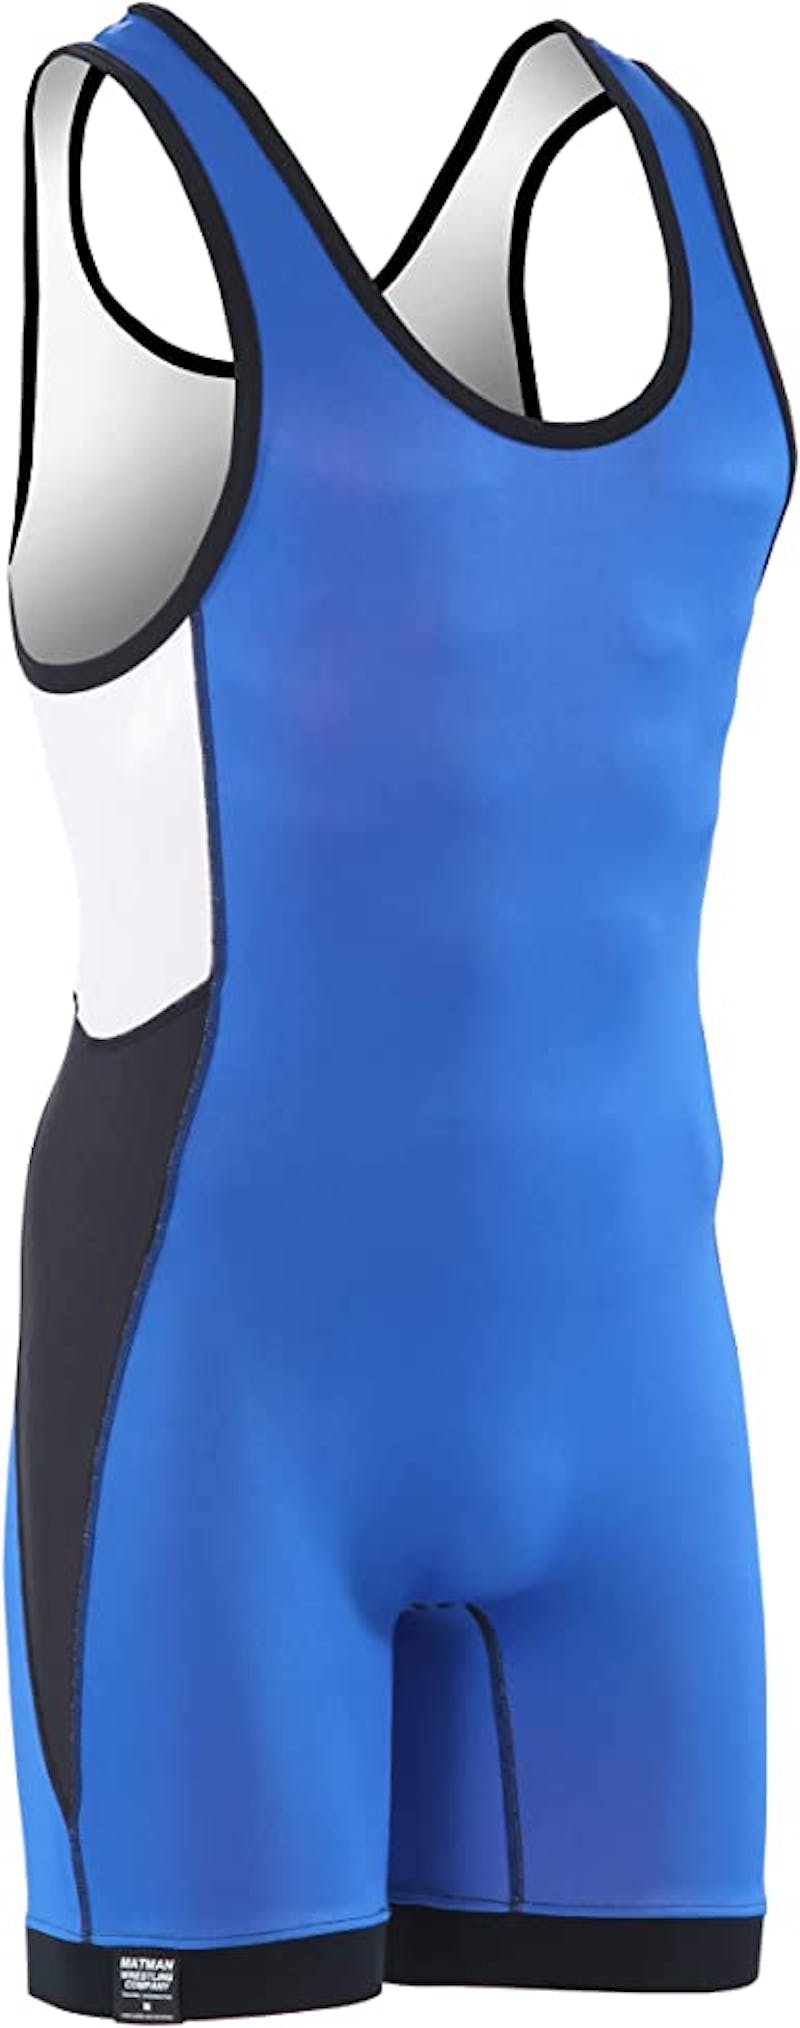 https://playitagainsports.imgix.net/images/11832-017SINGLET-1?auto=compress,format&fit=clip&w=800